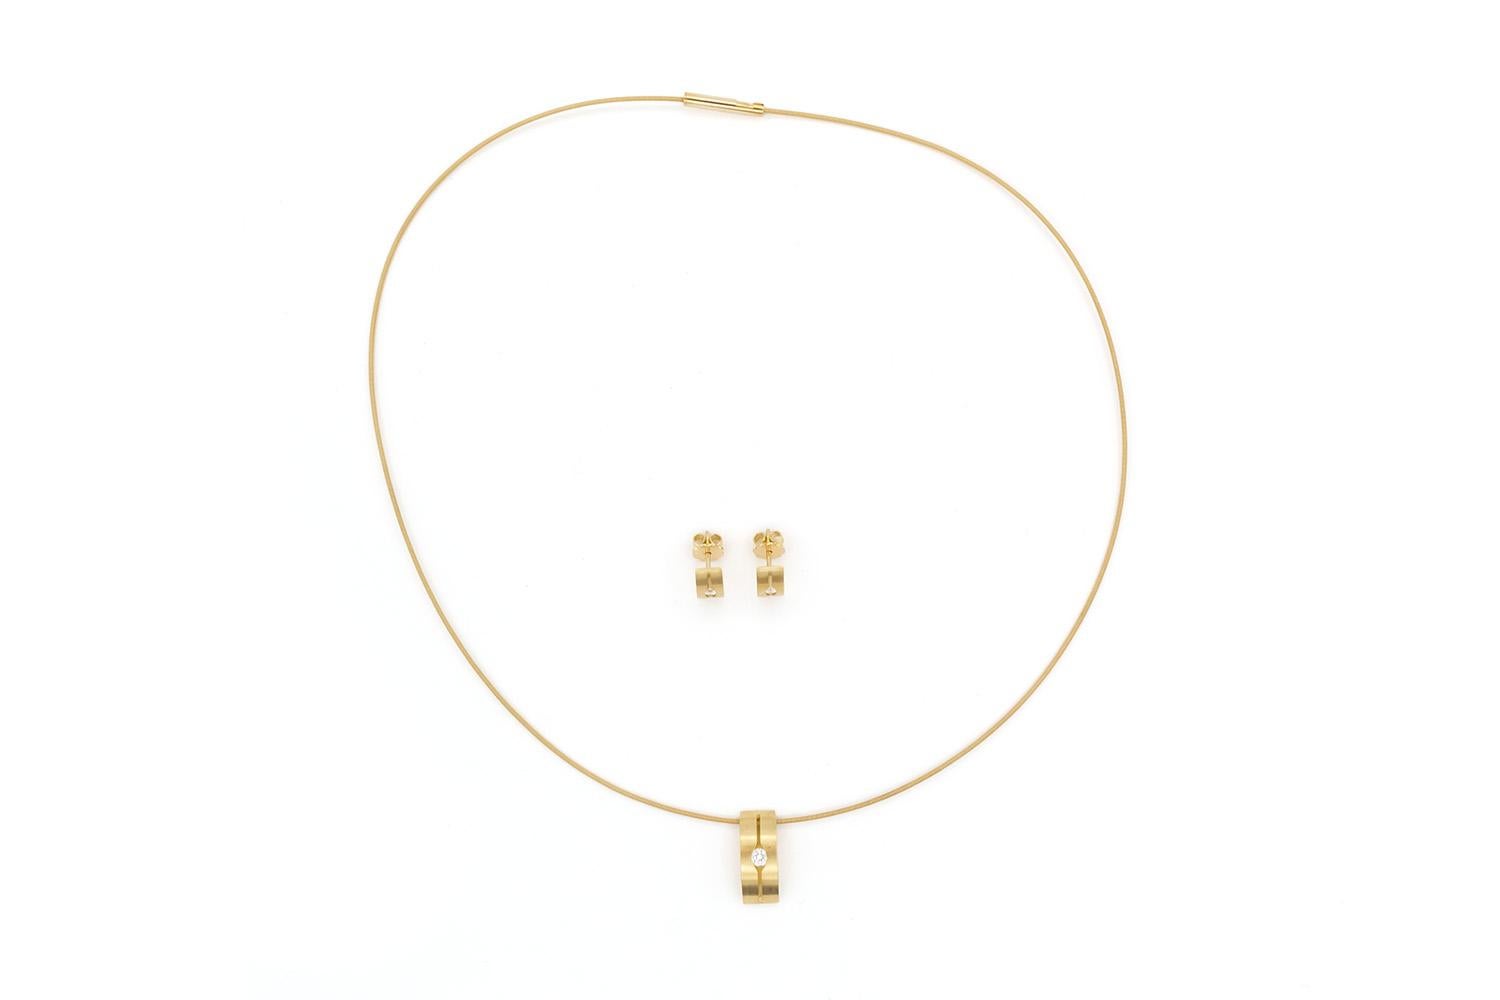 Niessing 18K Yellow Gold & Diamond Earring & Halsreif Cable Necklace Set 7